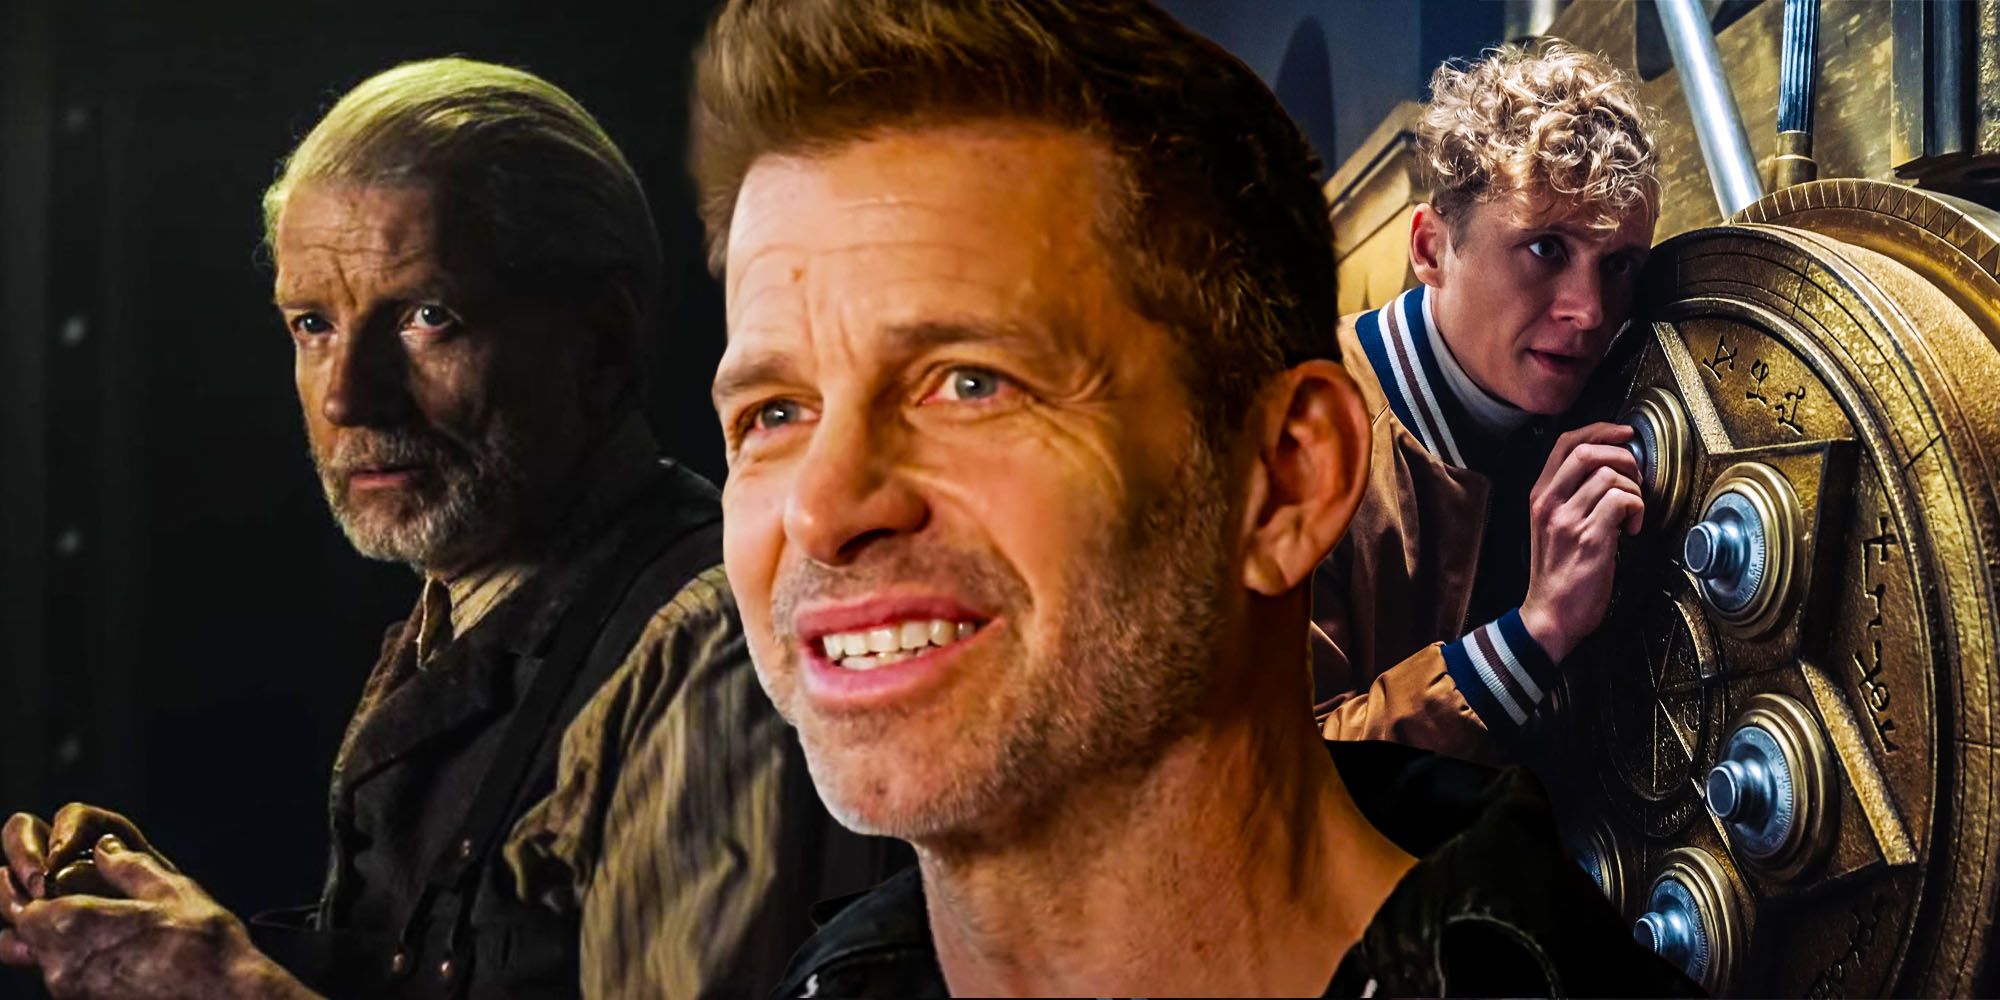 Army of thieves wagners ring cycle Zack snyder connection